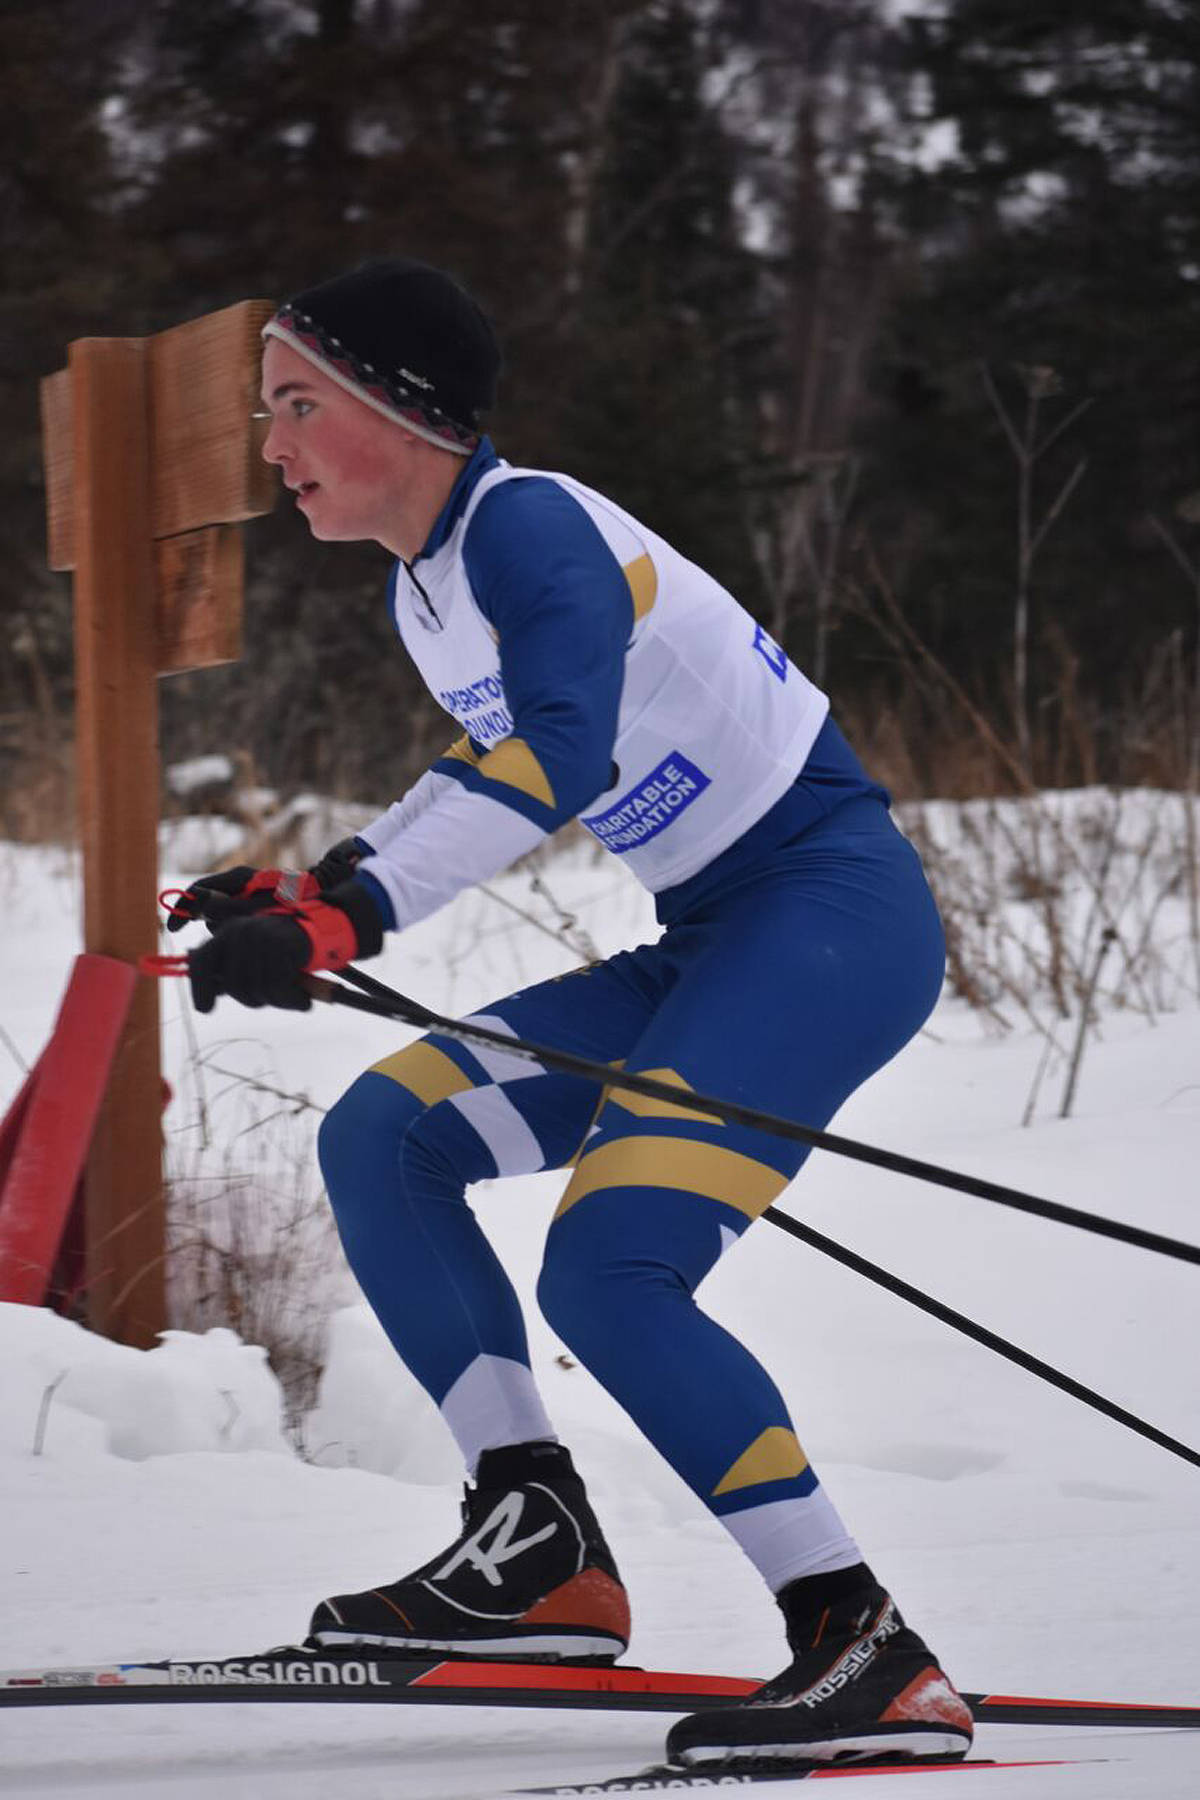 Homer’s Denver Waclawski skis during a two-day race over Jan. 12 and 13, 2018 at Government Peak in Hatcher Pass, Alaska. (Photo by Kate Baring)